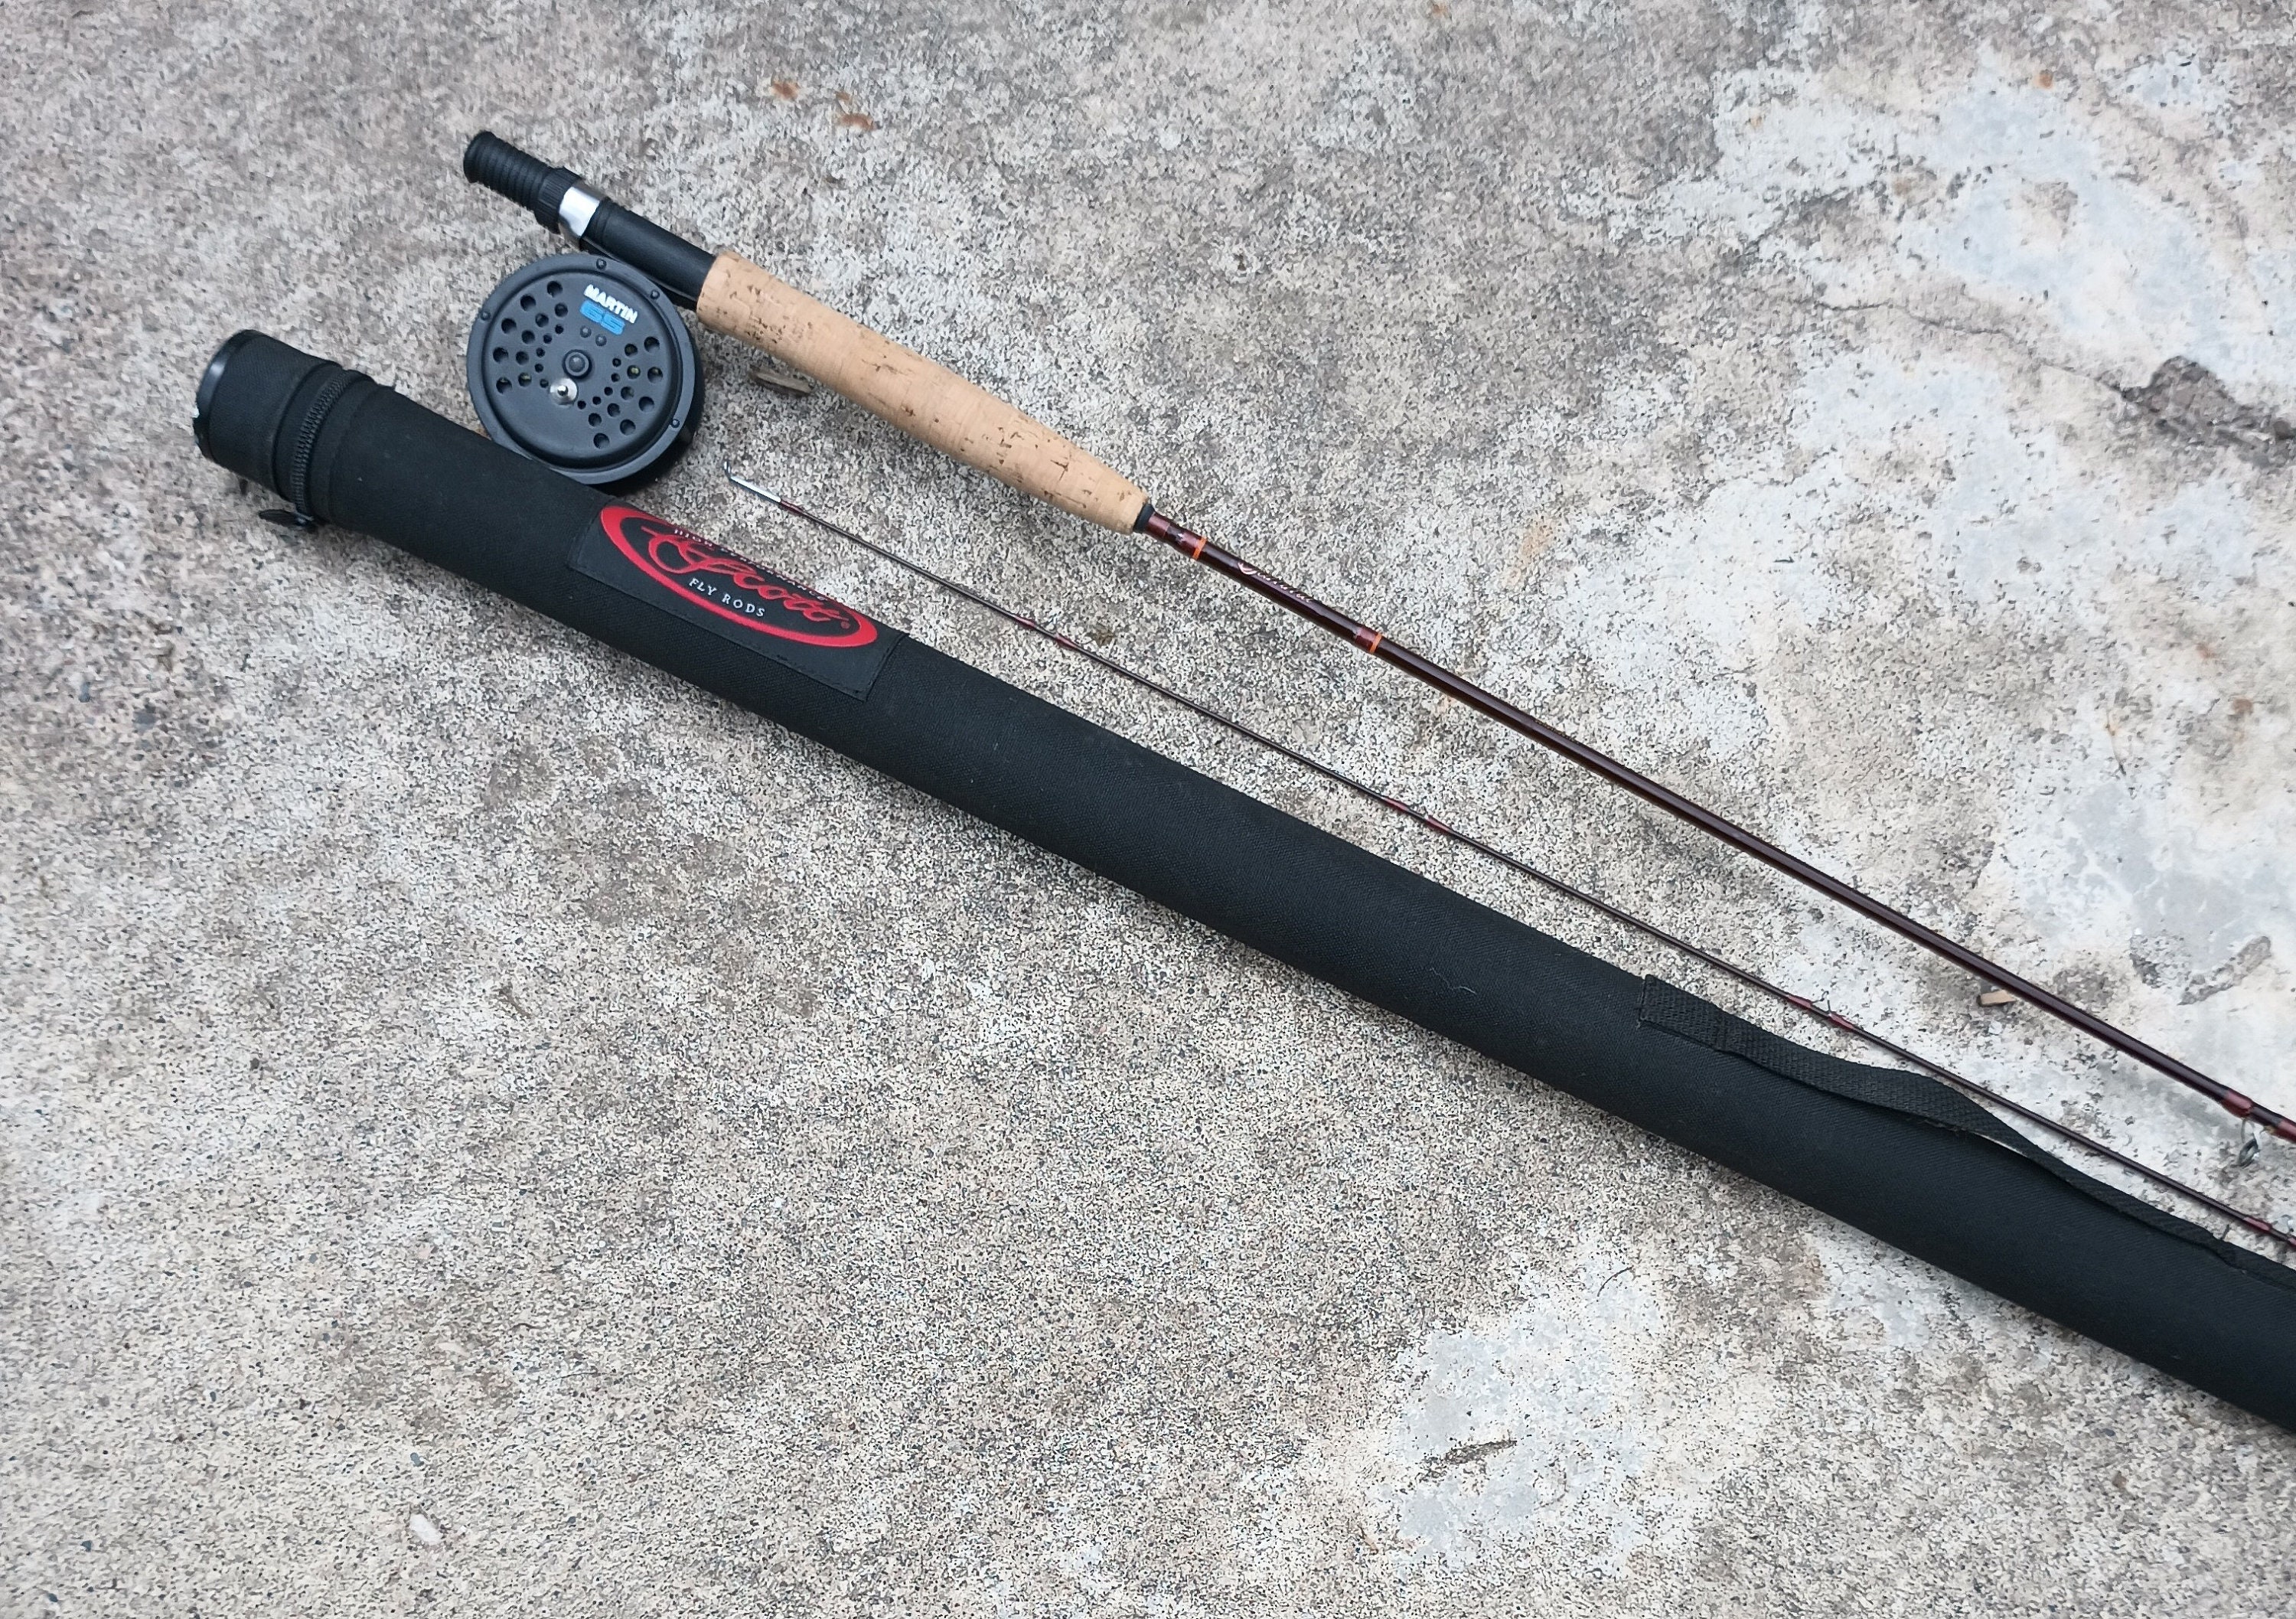 Fly Rod Cases -  Canada